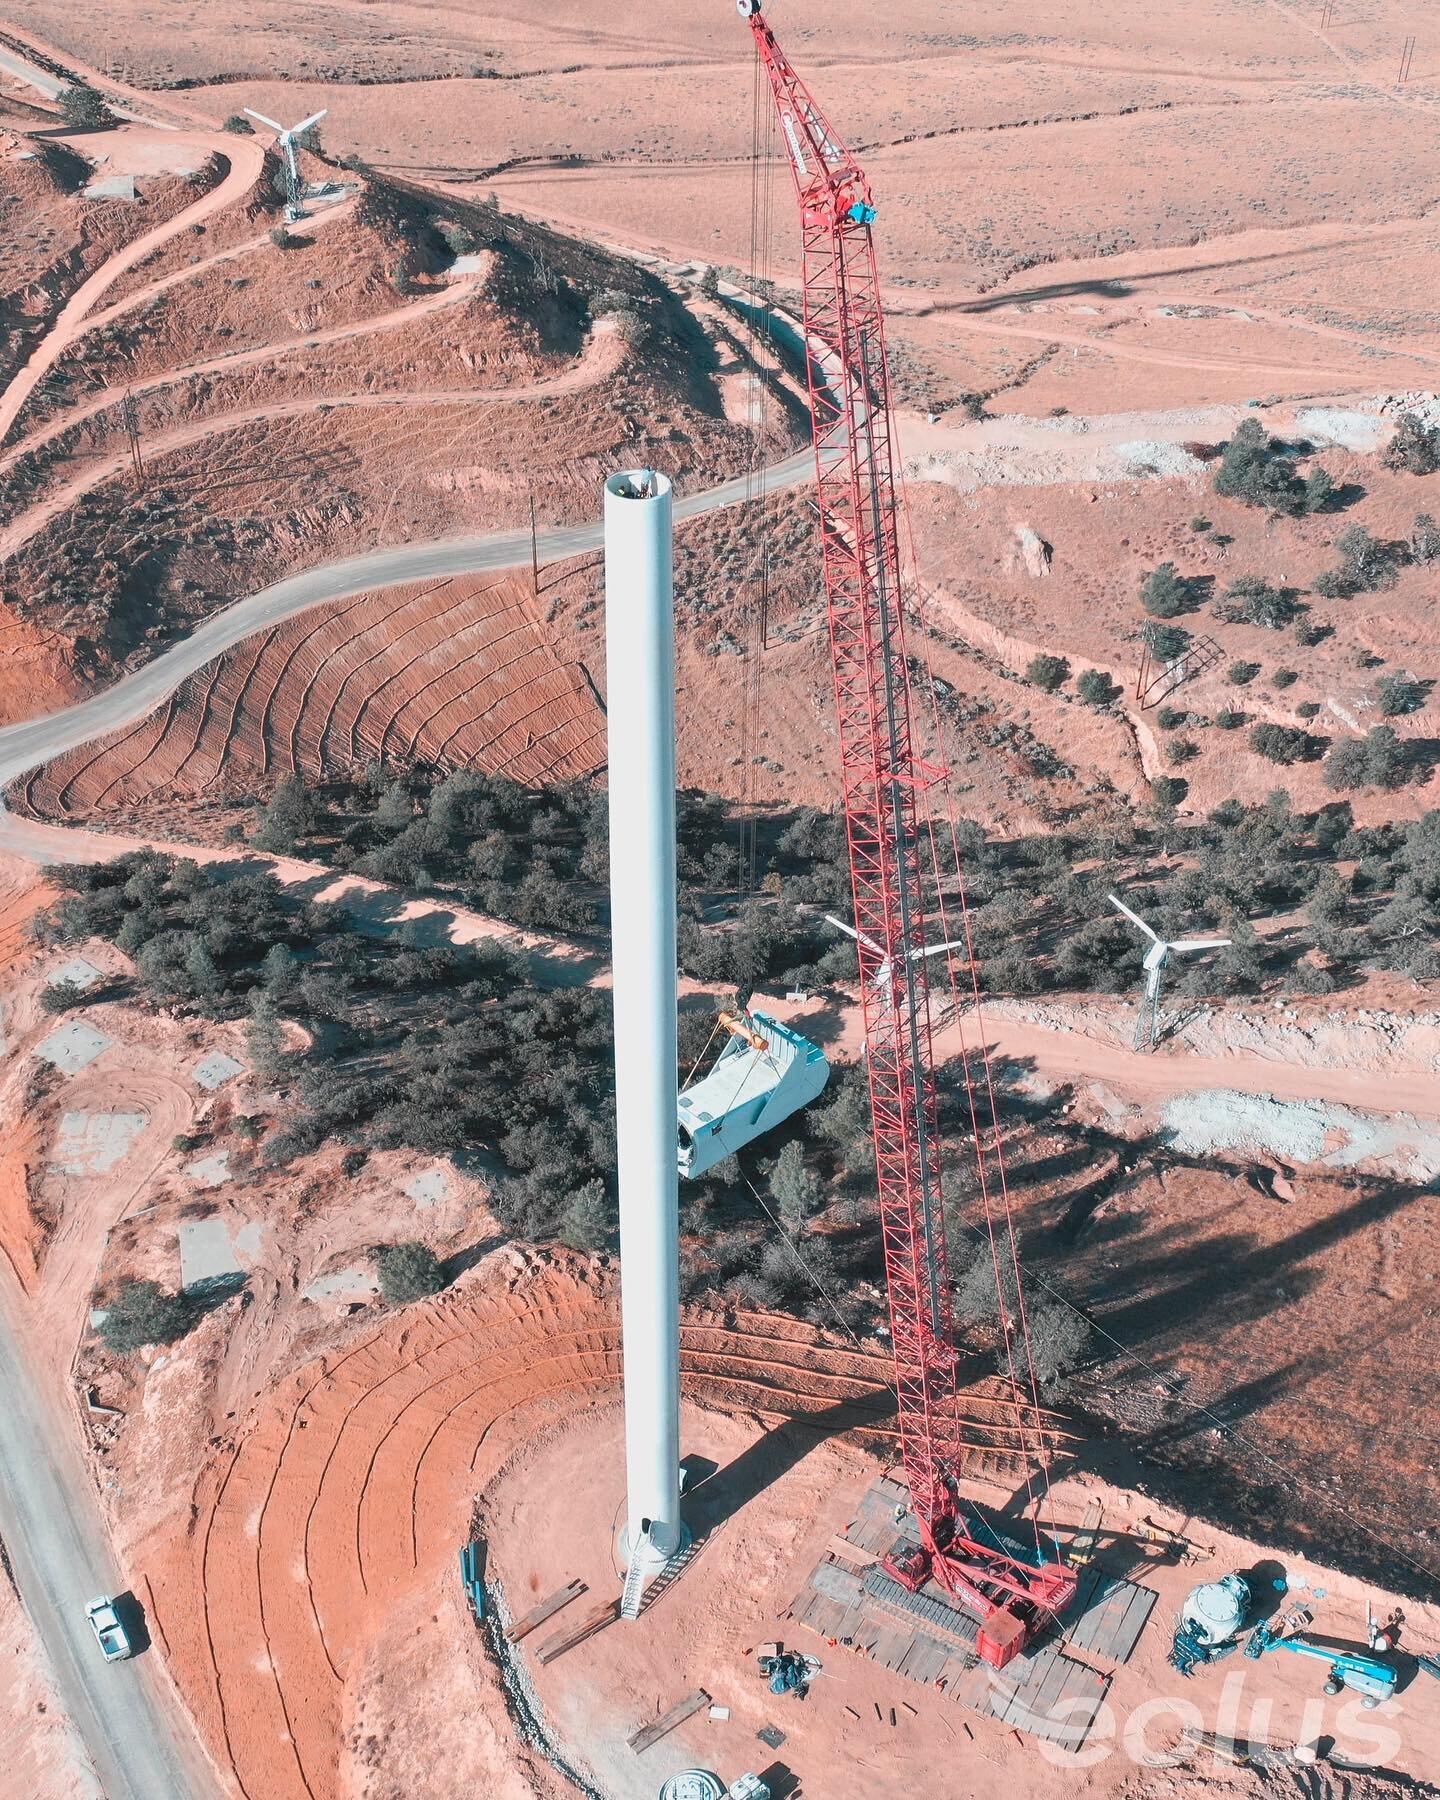 Up the nacelle goes! 285 ft (87 m) above ground, the nacelle houses the drive train and other tower-top components. The nacelle turns to face the direction of the wind, enabling greater energy capture.
#windenergy #windpower #windturbine #wind #windf